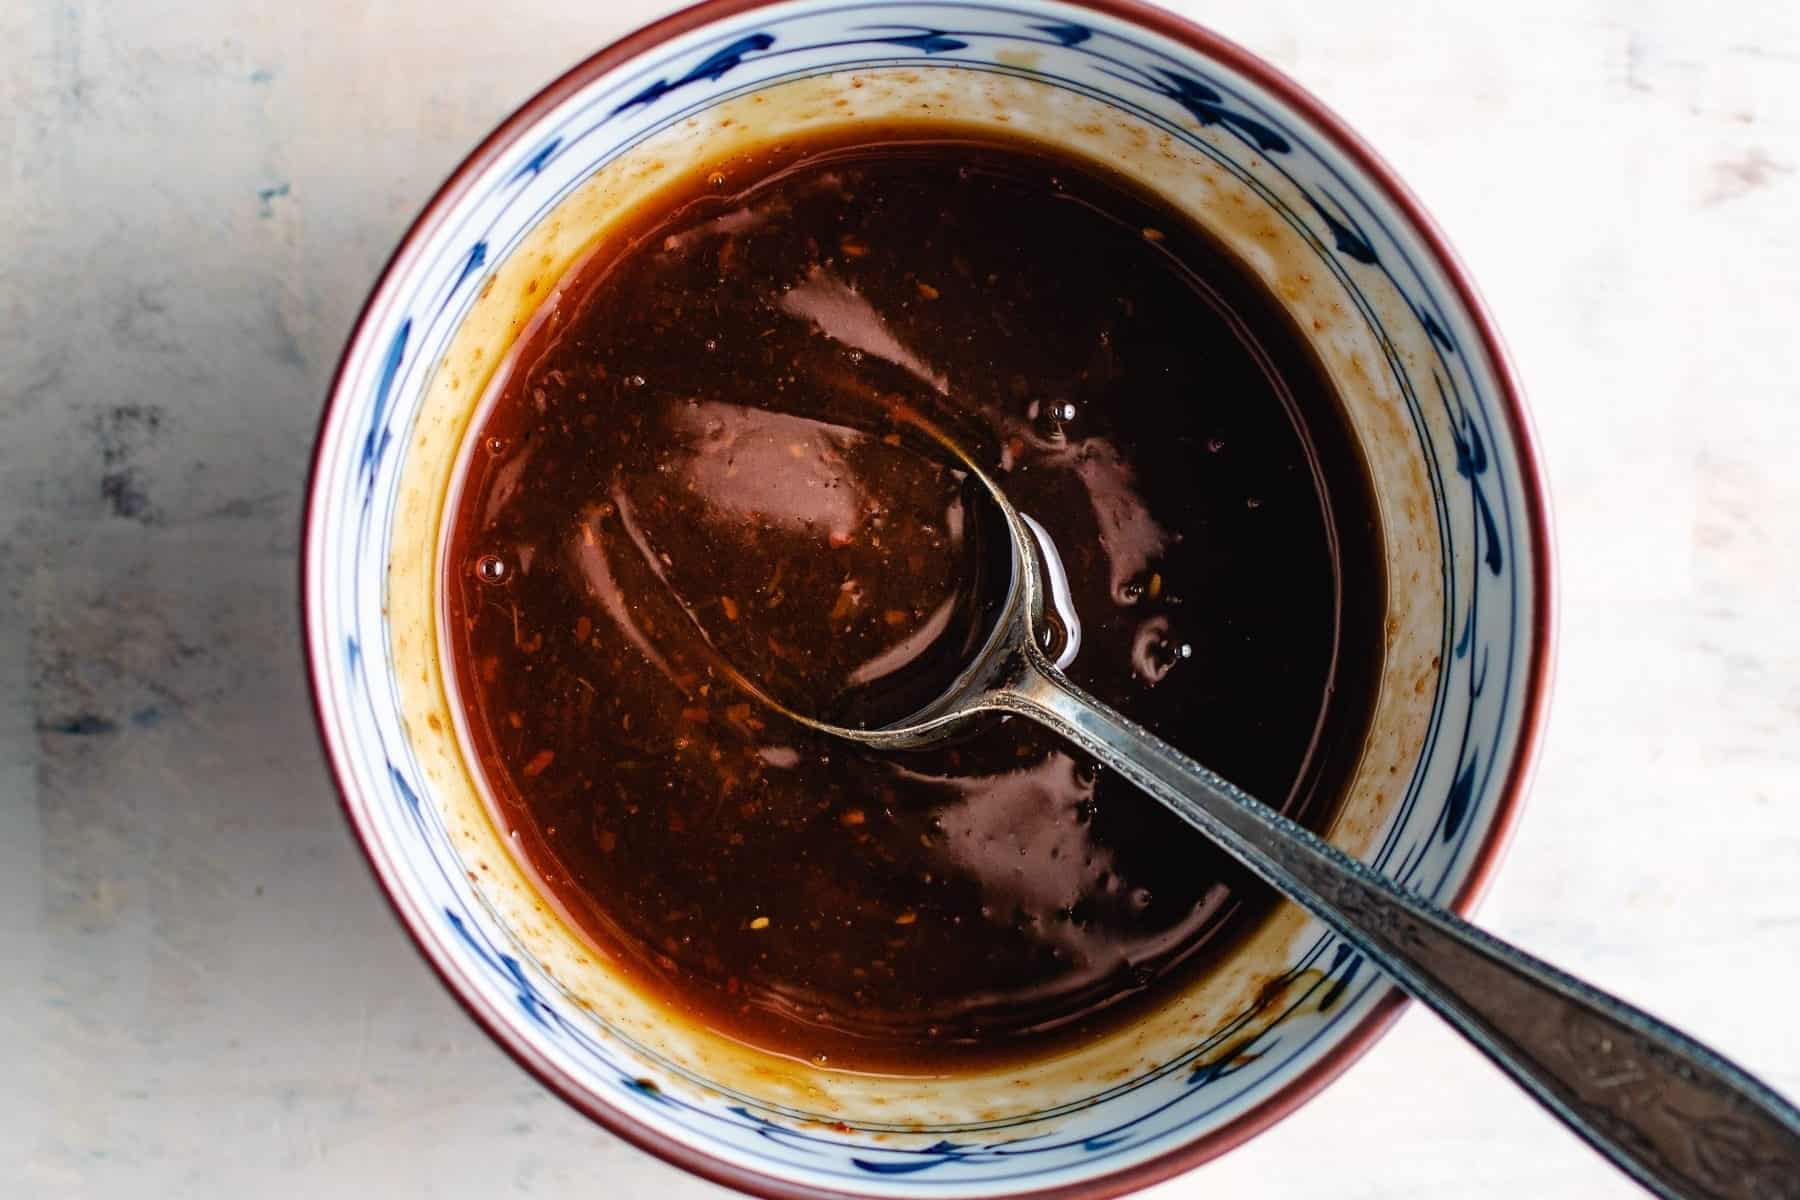 Photo shows honey sriracha sauce made with healthy ingredients and mixed in a small bowl.